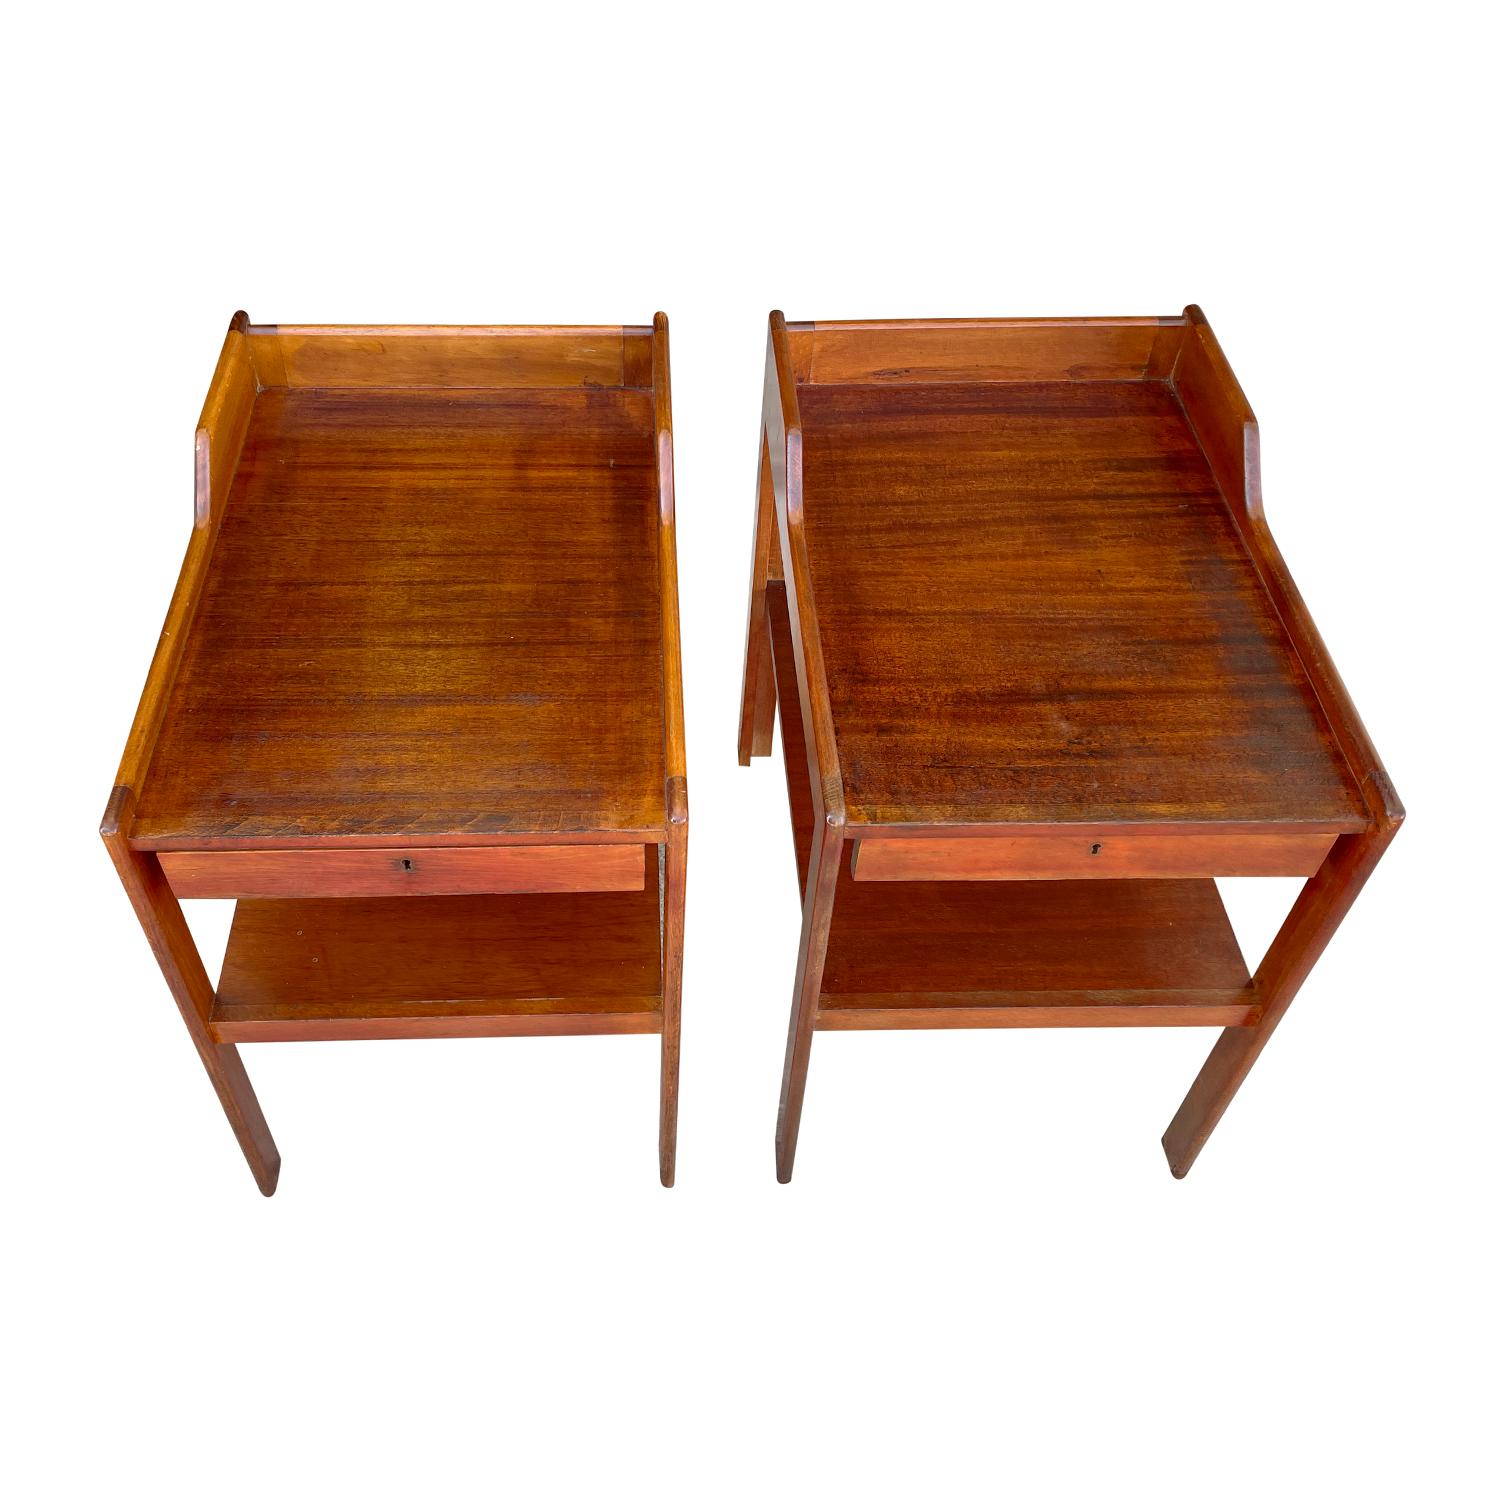 Mid-Century Modern 20th Century Swedish Mahogany Nightstands, Bedside Tables by Carl-Axel Acking